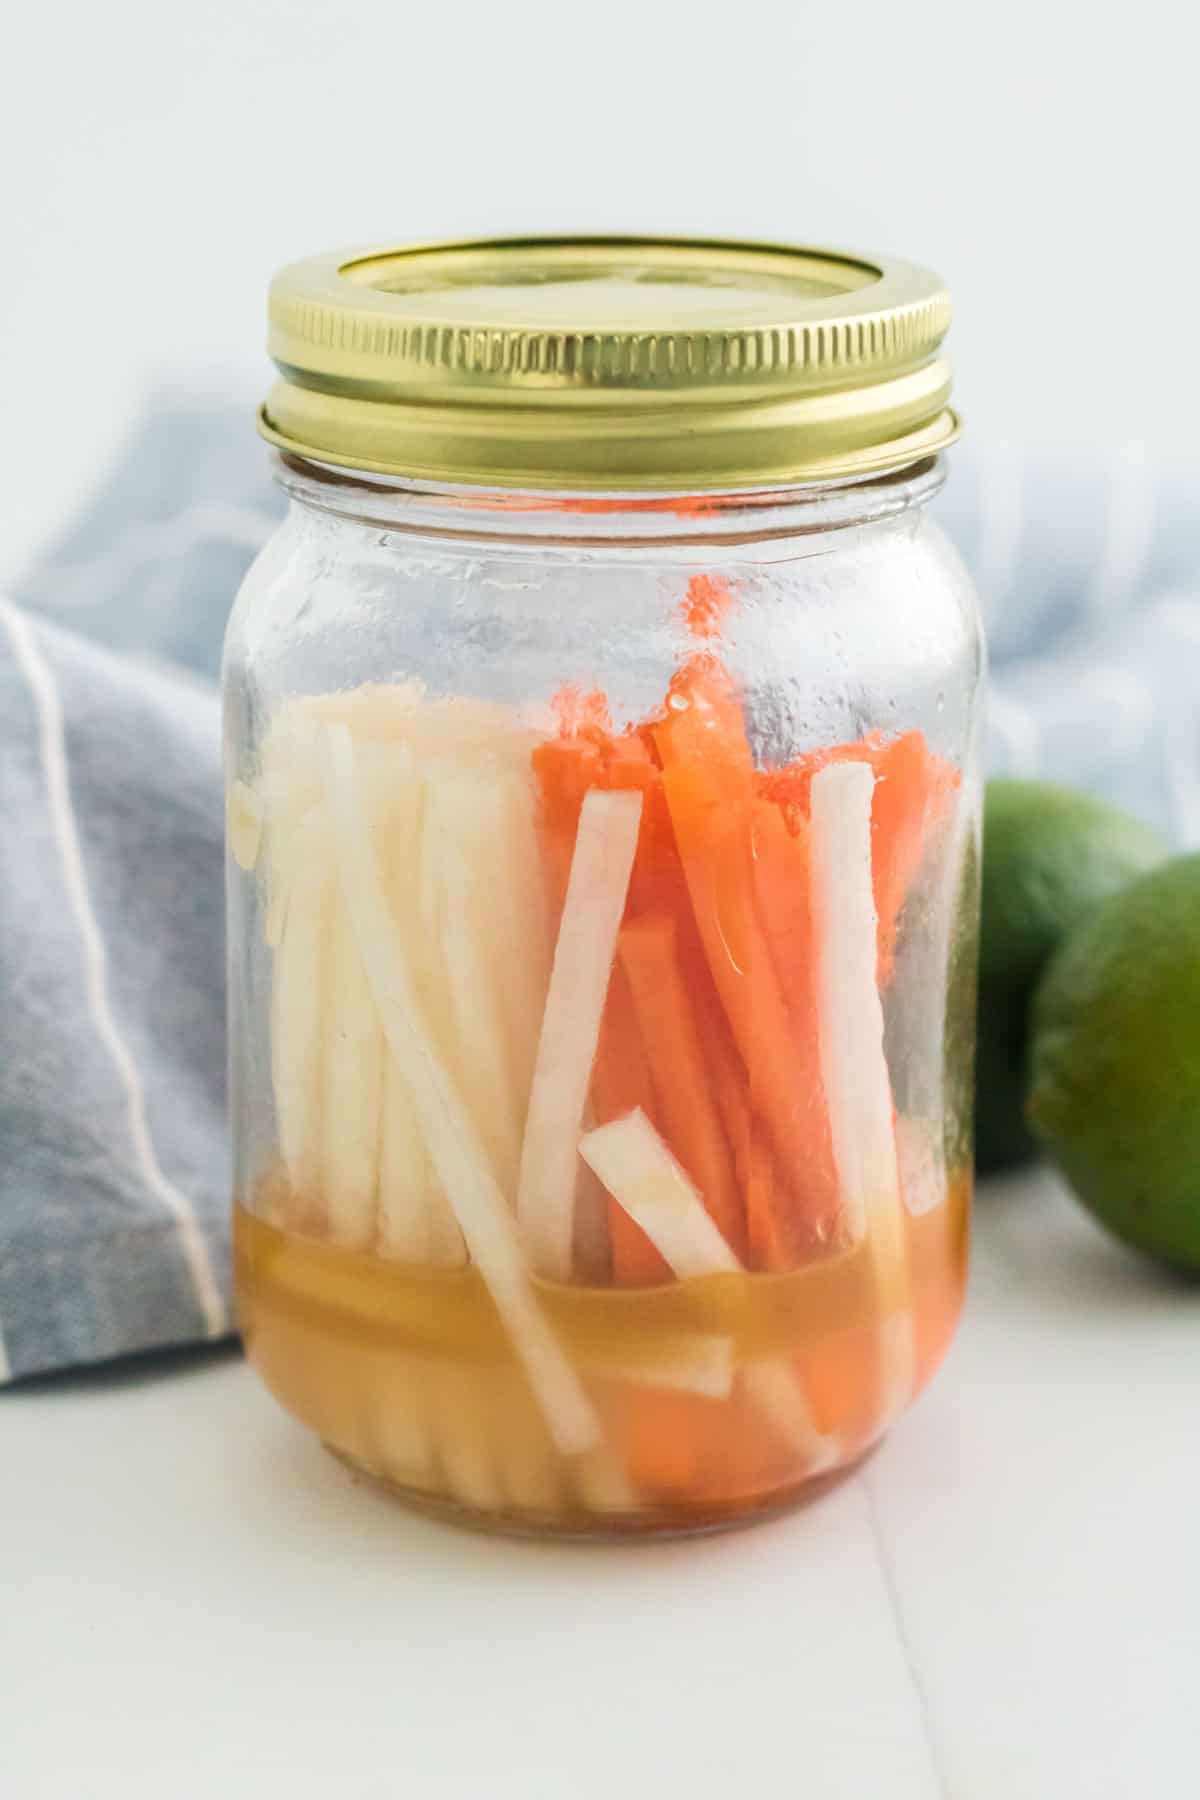 Julienned carrots and daikon radishes being pickled in a mason jar